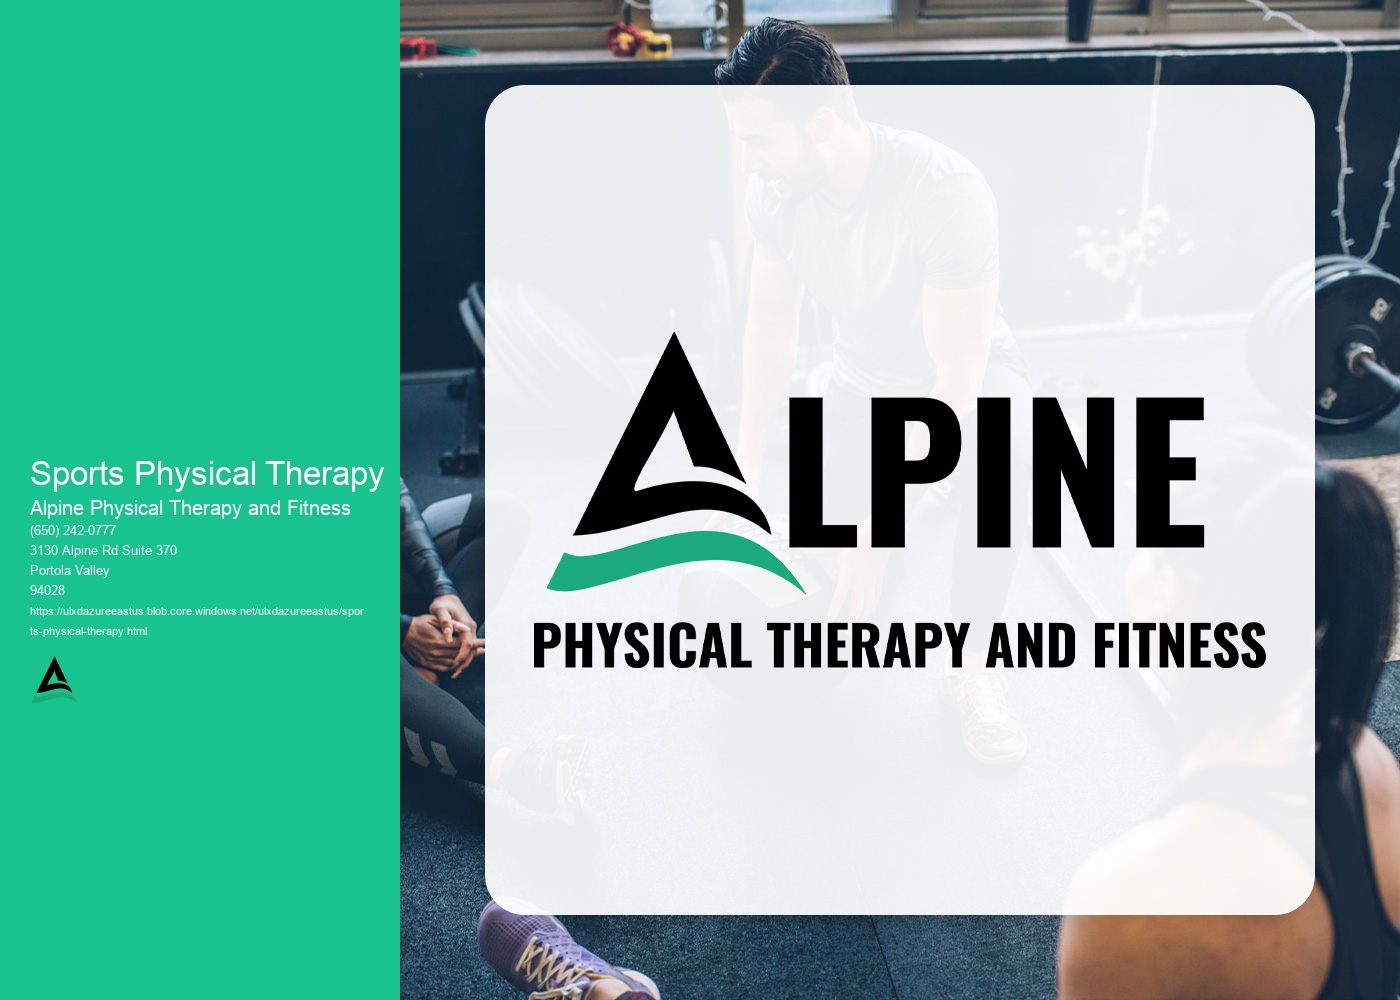 How does sports physical therapy incorporate mental and emotional aspects of recovery and performance enhancement, and what techniques or interventions are commonly used in this regard?